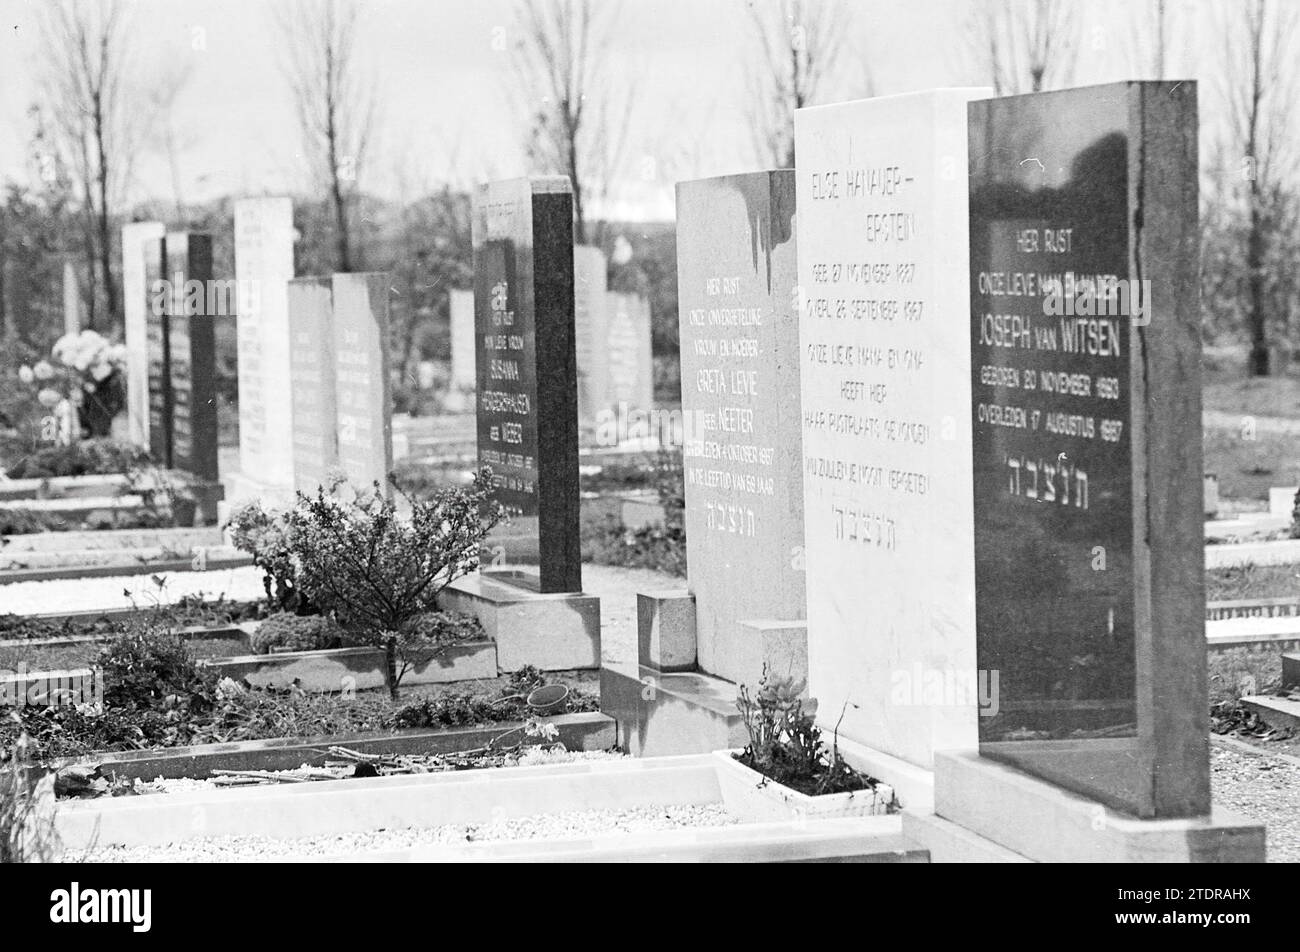 Cemetery, Whizgle News from the Past, Tailored for the Future. Explore historical narratives, Dutch The Netherlands agency image with a modern perspective, bridging the gap between yesterday's events and tomorrow's insights. A timeless journey shaping the stories that shape our future Stock Photo